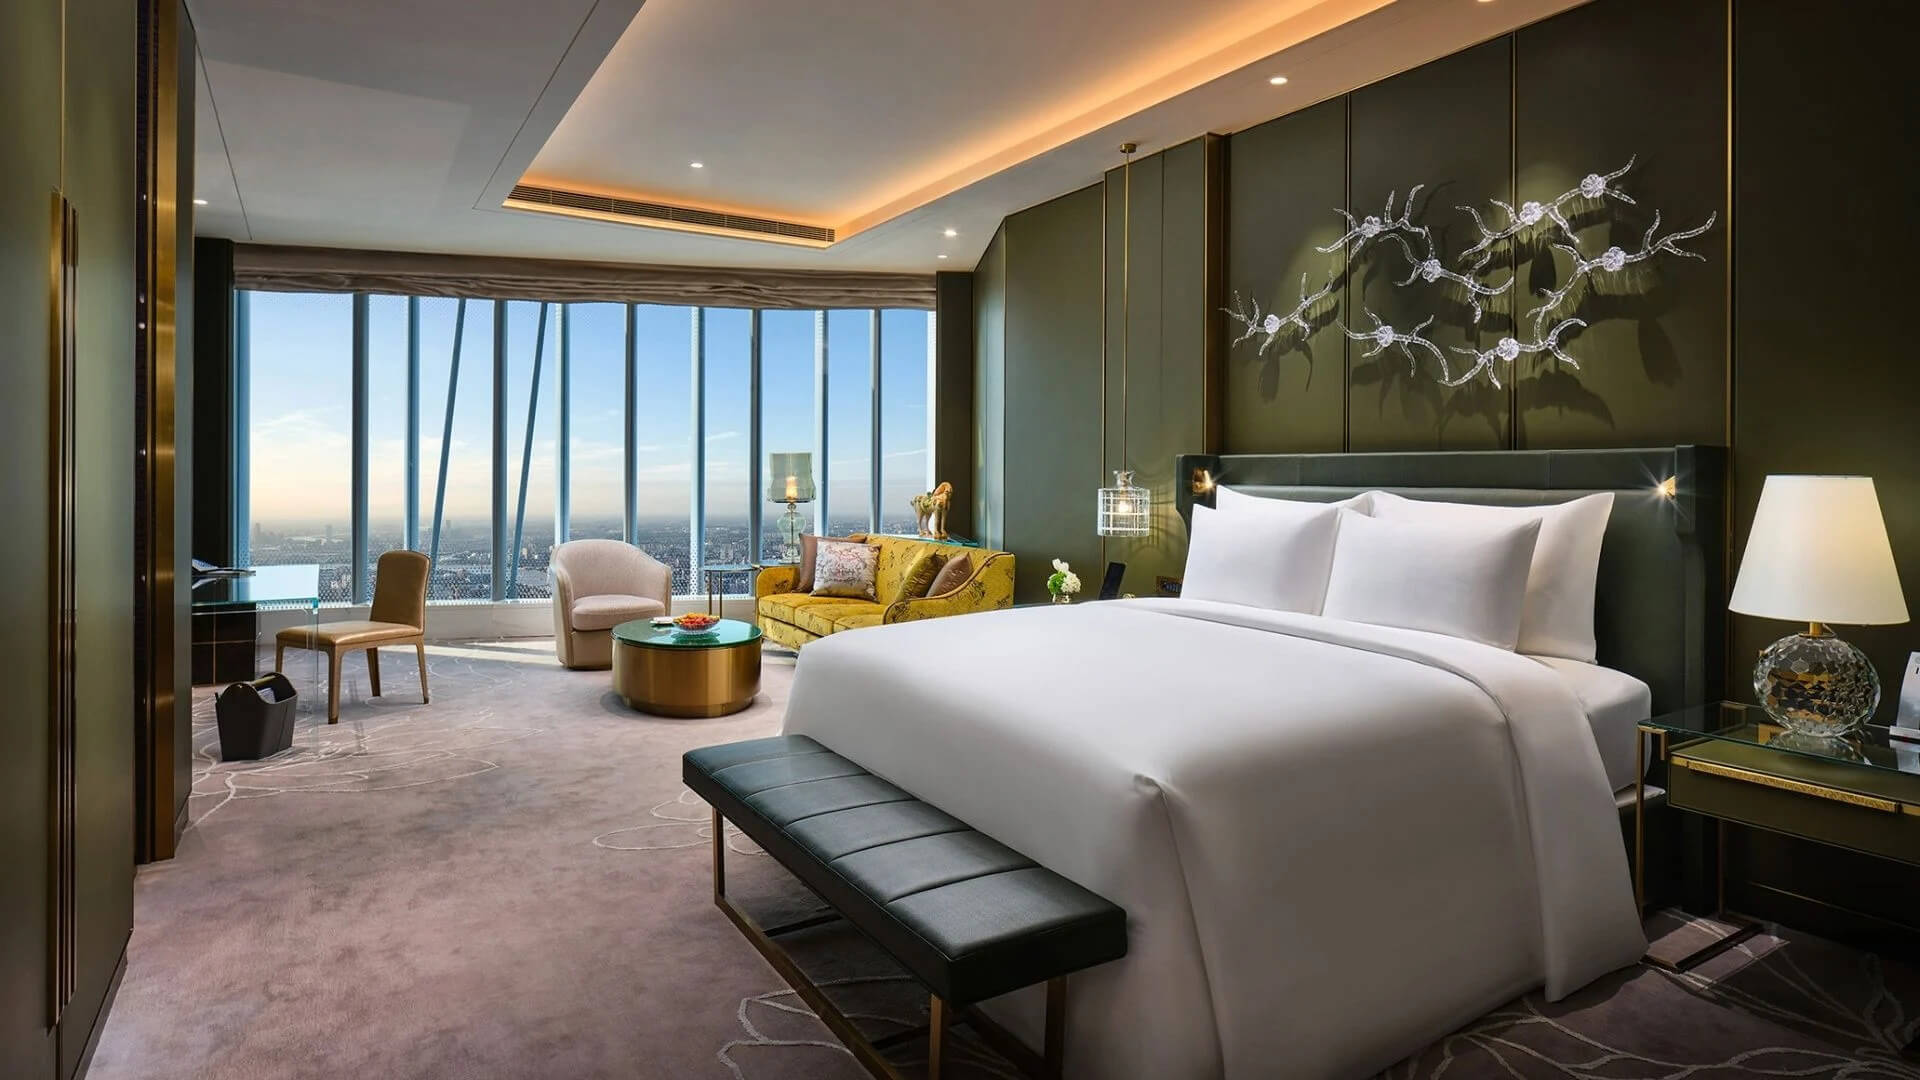 J-hotel-shanghai-tower-premium-stateroom-and-stateroom-bed-area-new-chinese-style.jpg